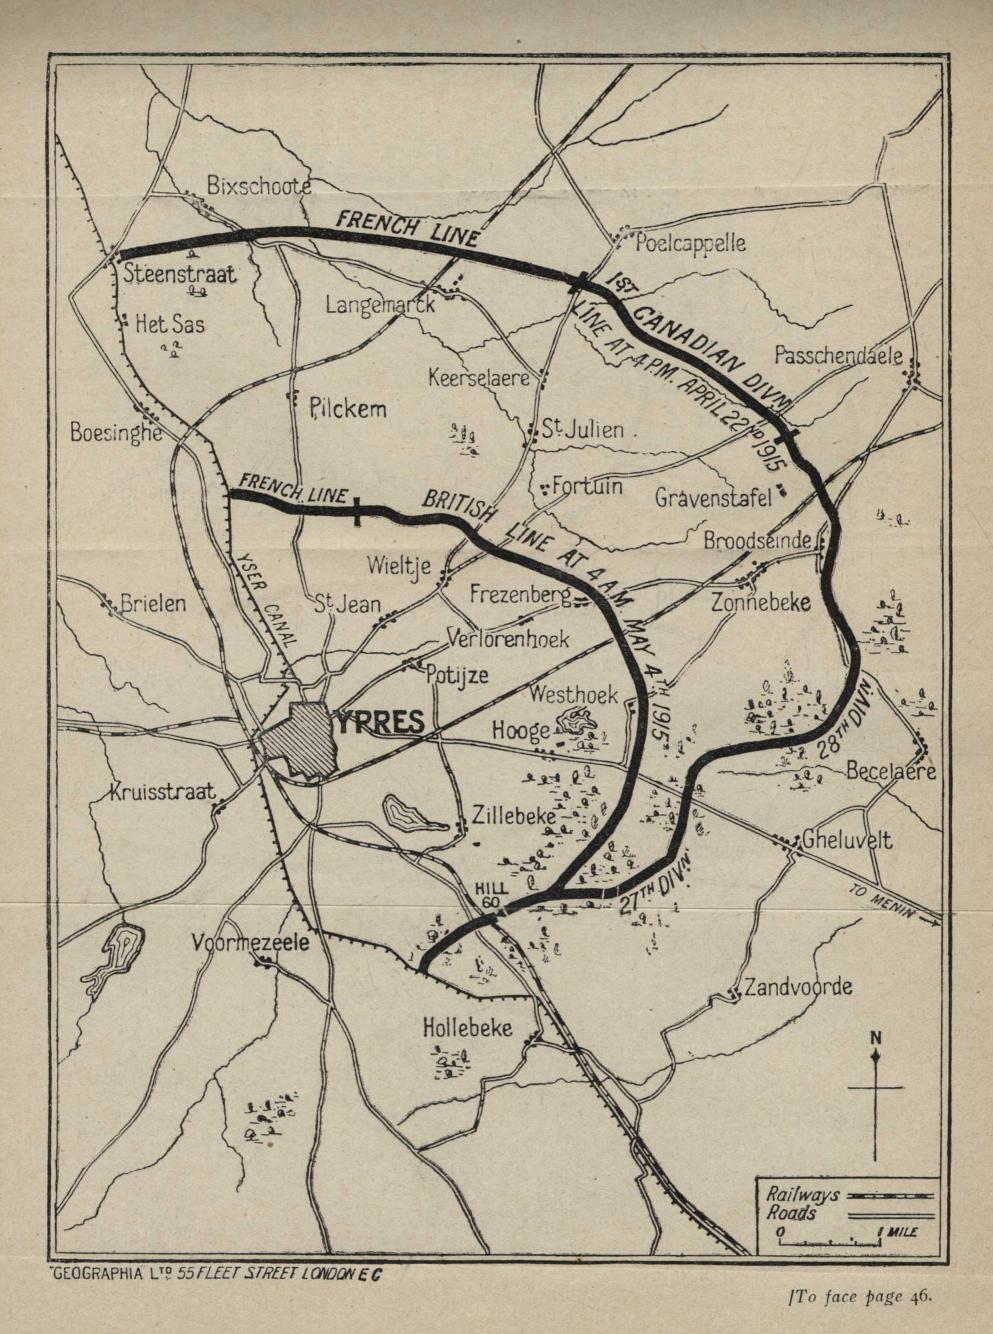 Map of Ypres and area